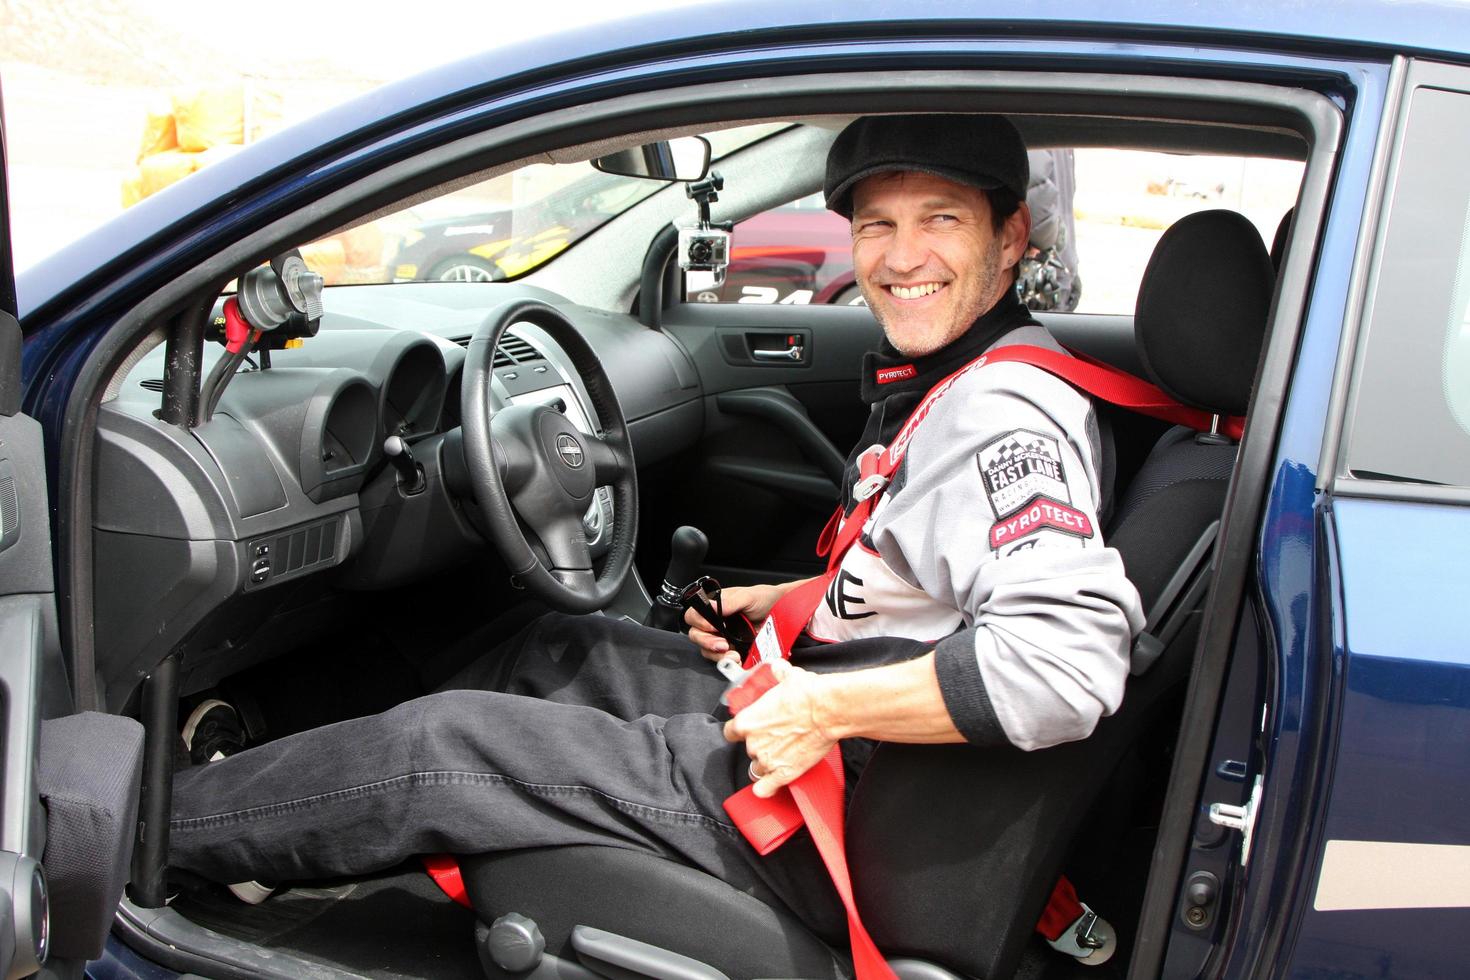 LOS ANGELES, MAR 19 - Stephen Moyer at the Toyota Pro Celebrity Race Training Session at Willow Springs Speedway on March 19, 2011 in Rosamond, CA photo